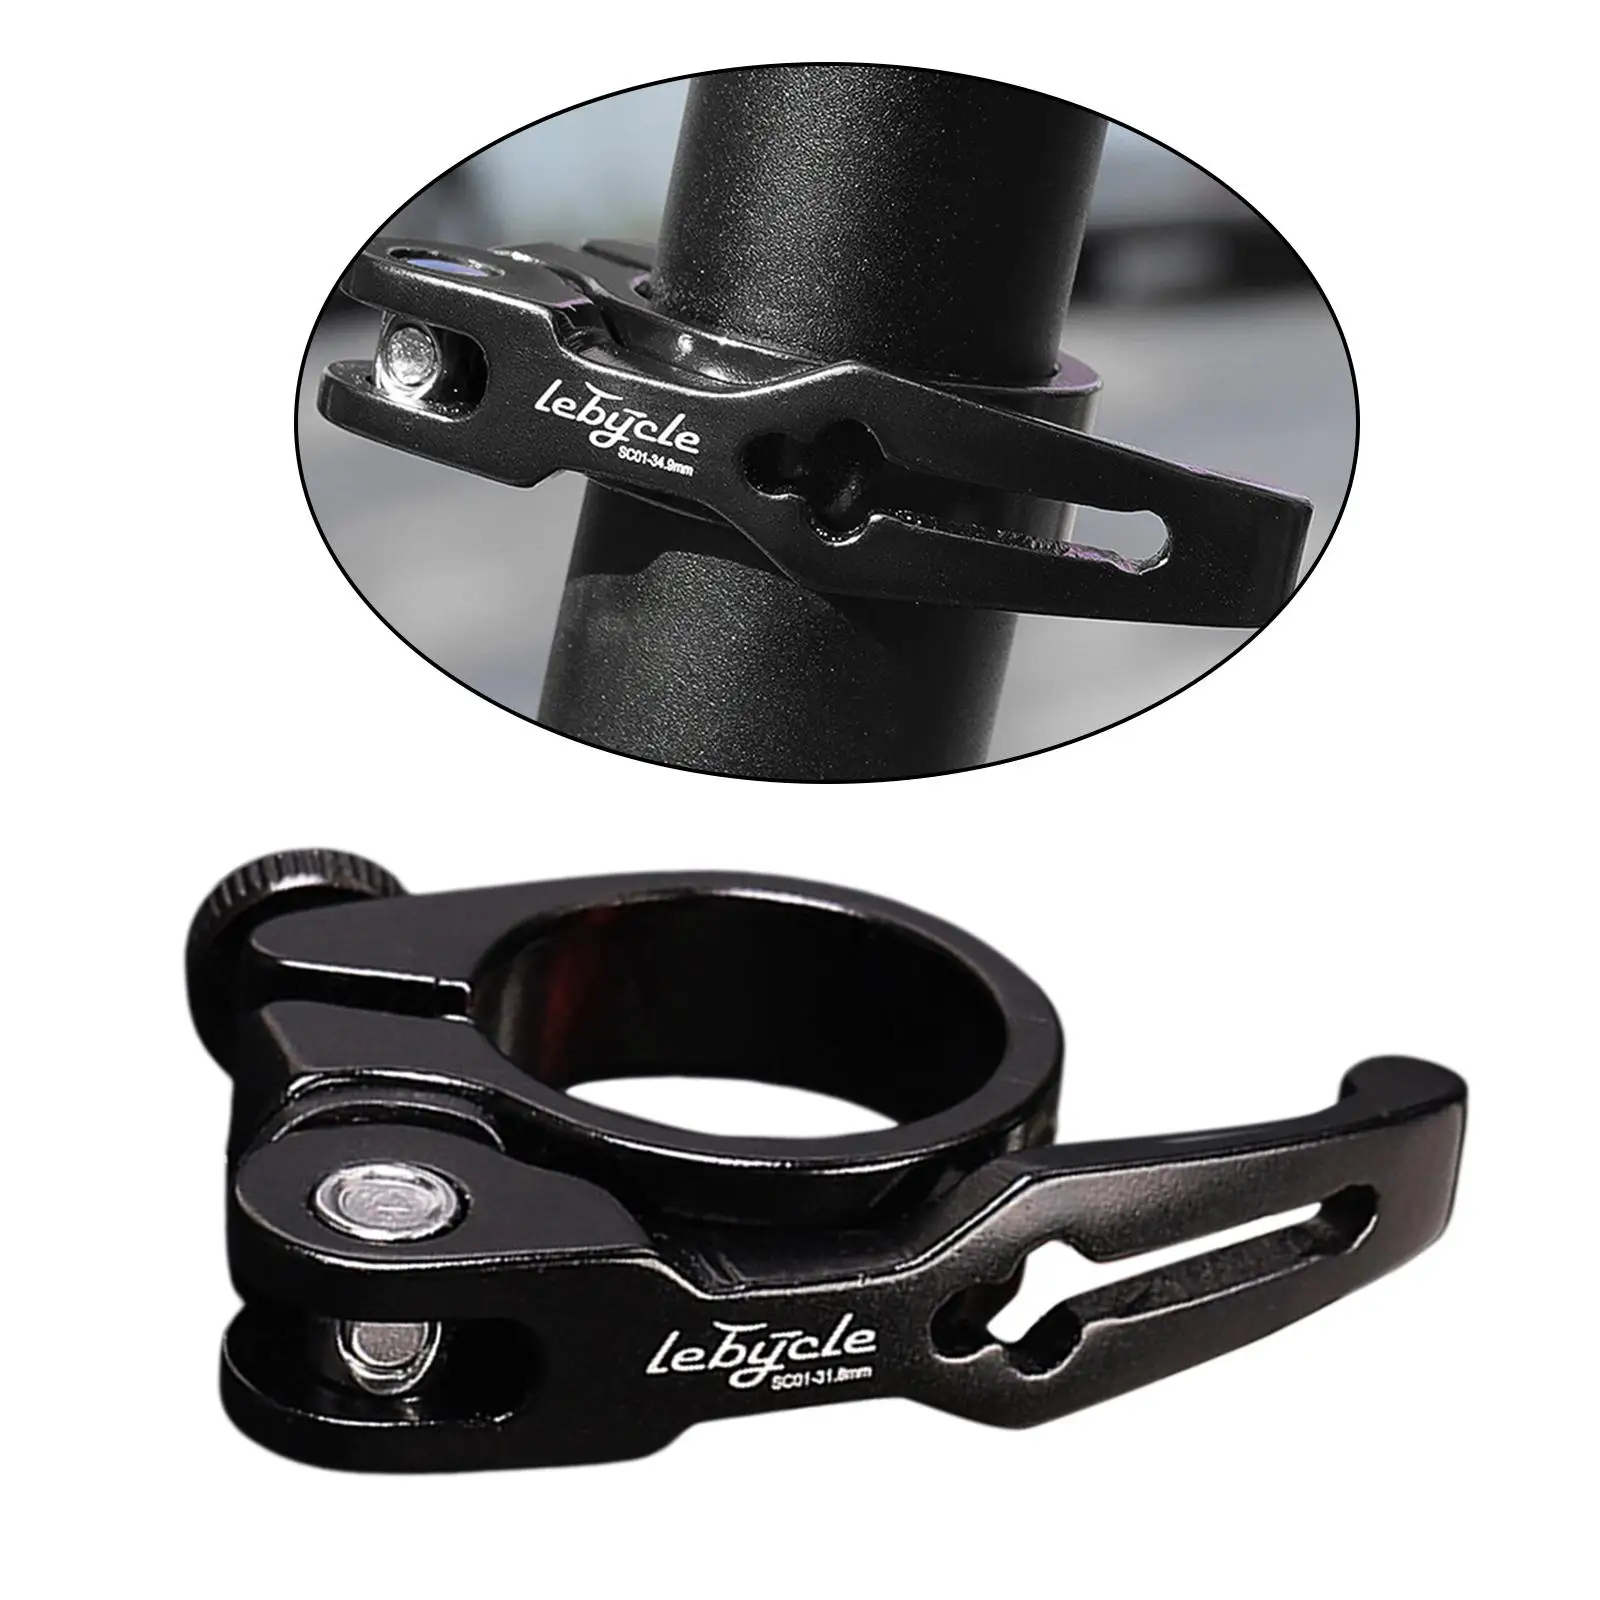 Aluminium Bike Seatpost Clamp Quick Release Mountain BMX Road Bicycle Pole Seat Post Clip 31.8mm OR 34.9mm Part